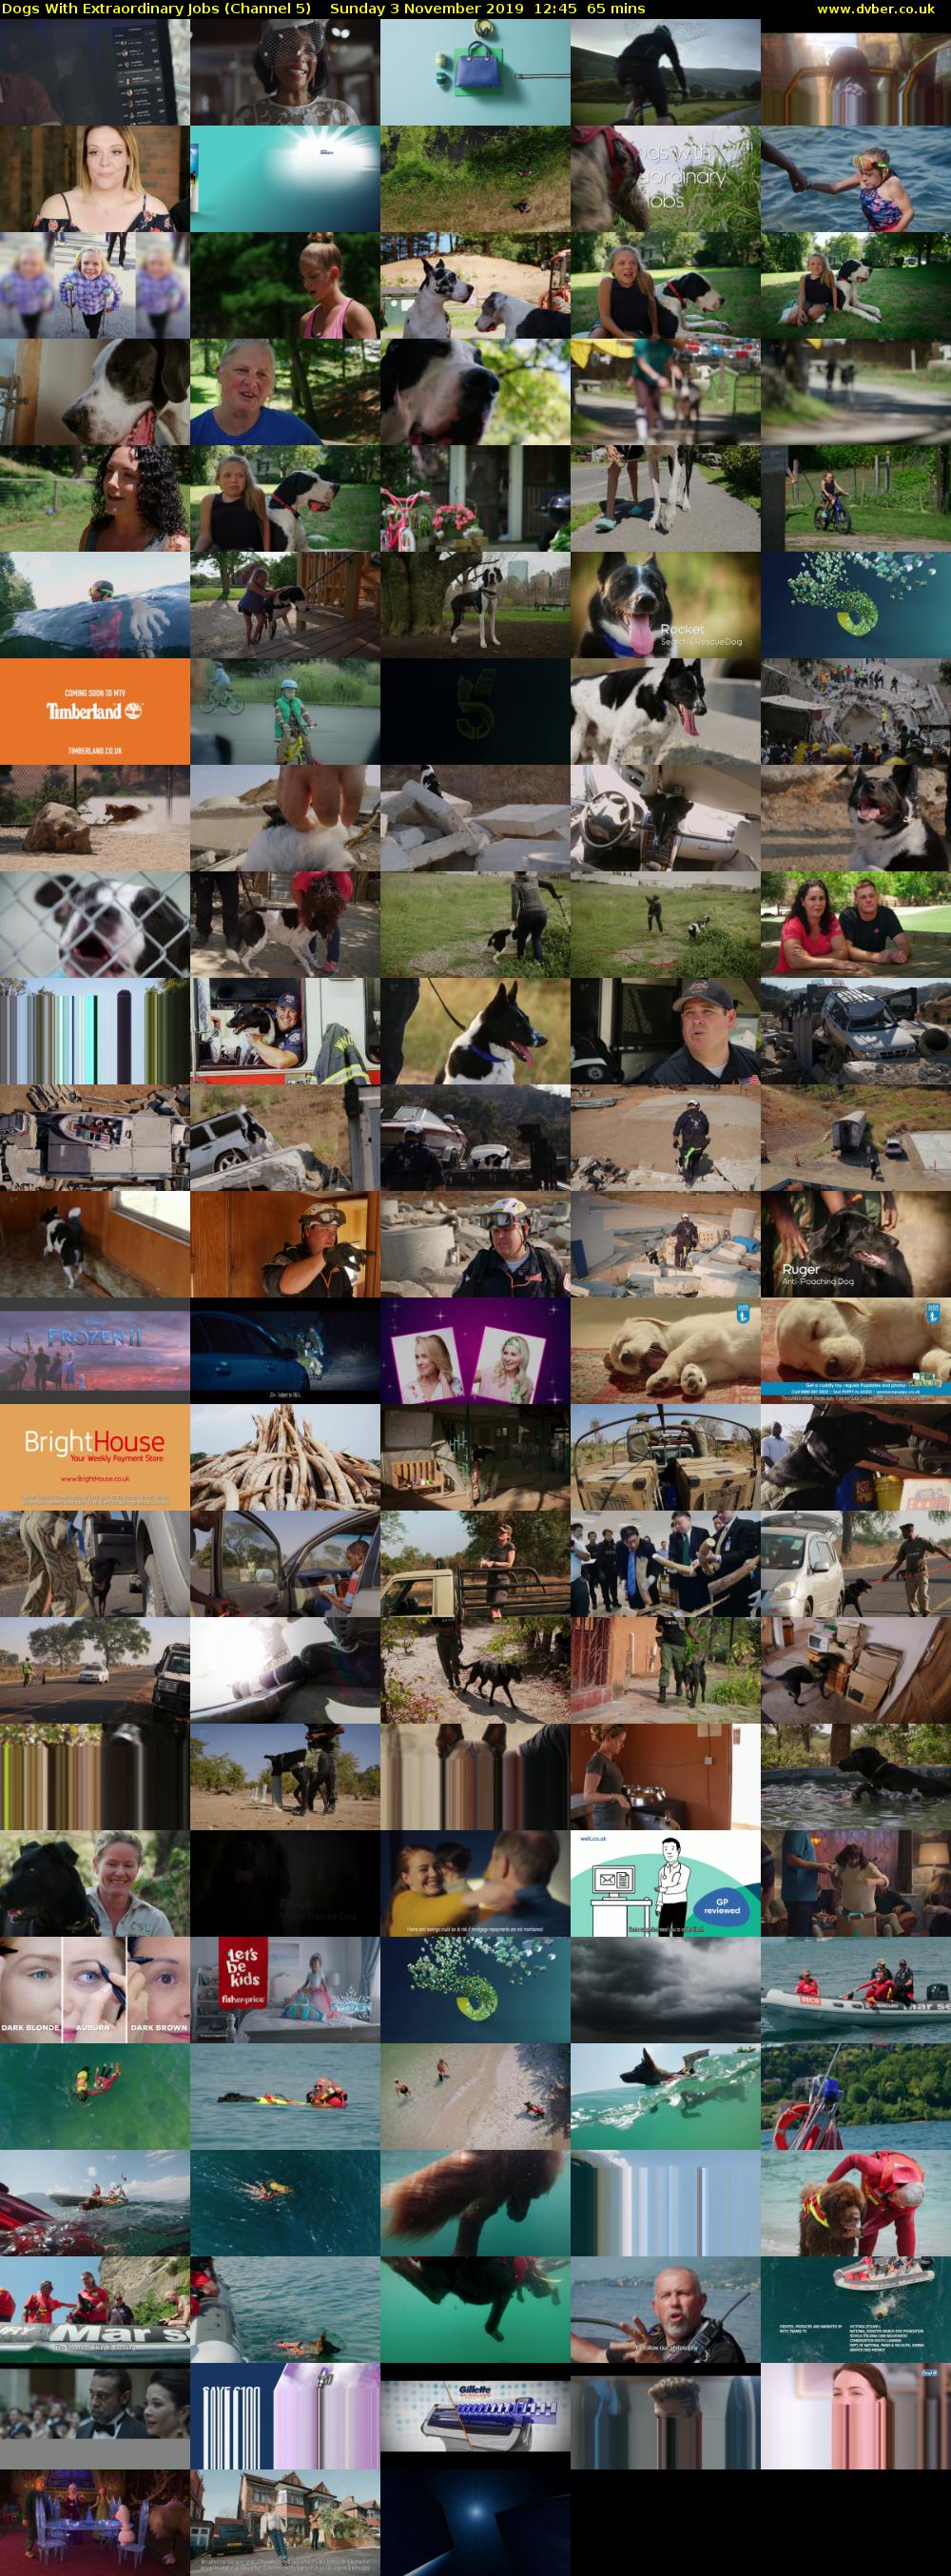 Dogs With Extraordinary Jobs (Channel 5) Sunday 3 November 2019 12:45 - 13:50